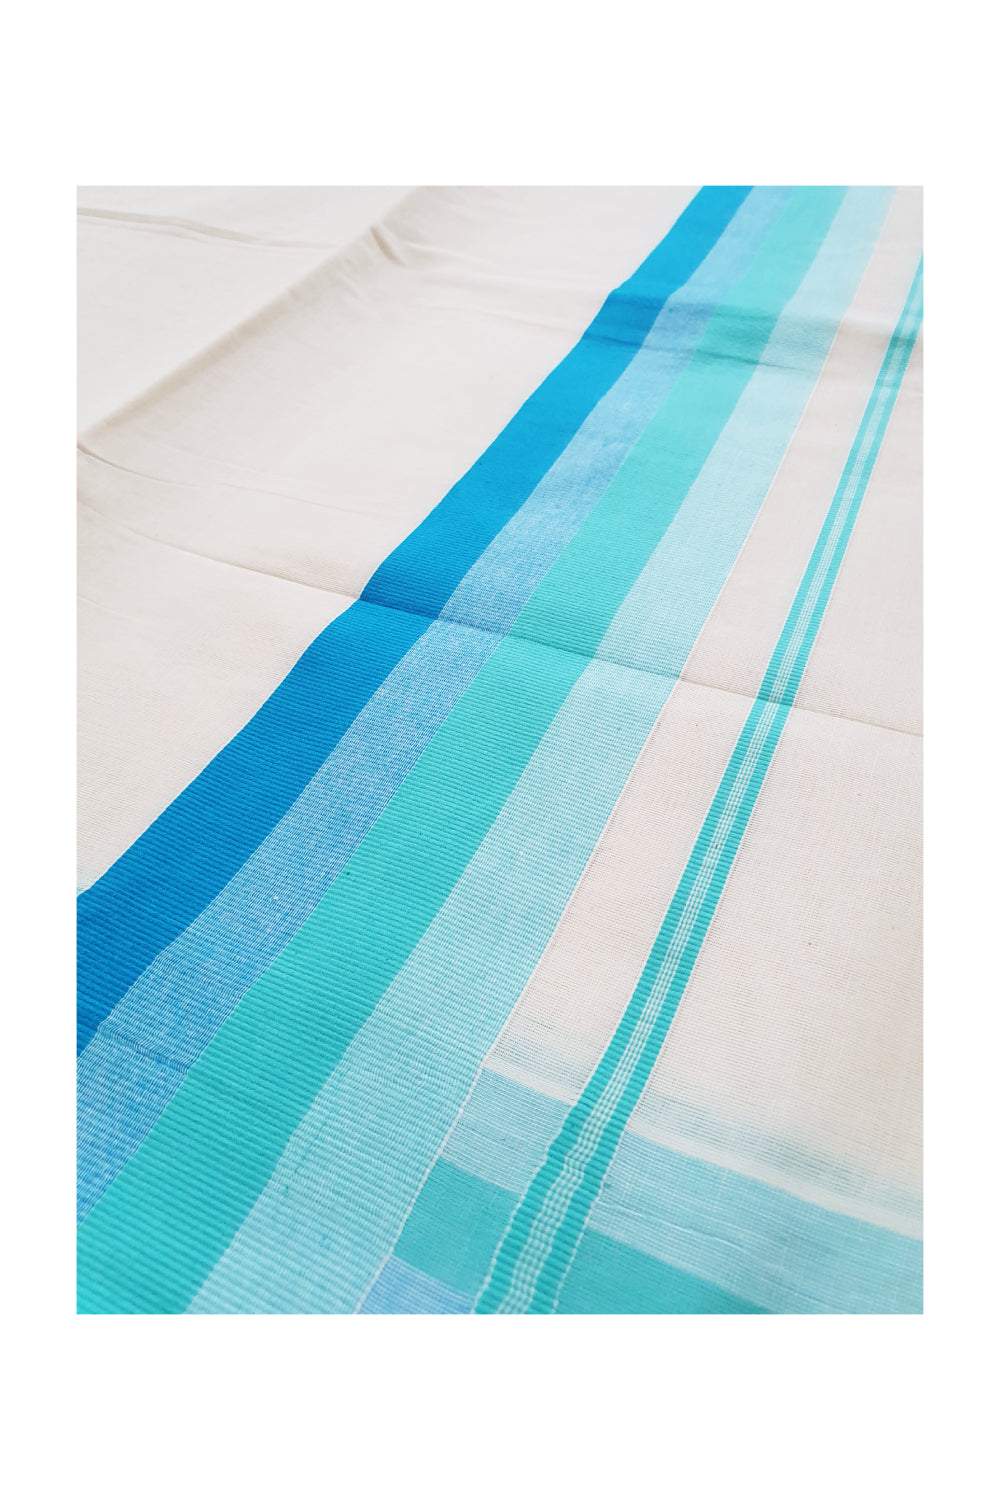 Kerala Saree with Sky Blue and Turquoise Lines Border Design